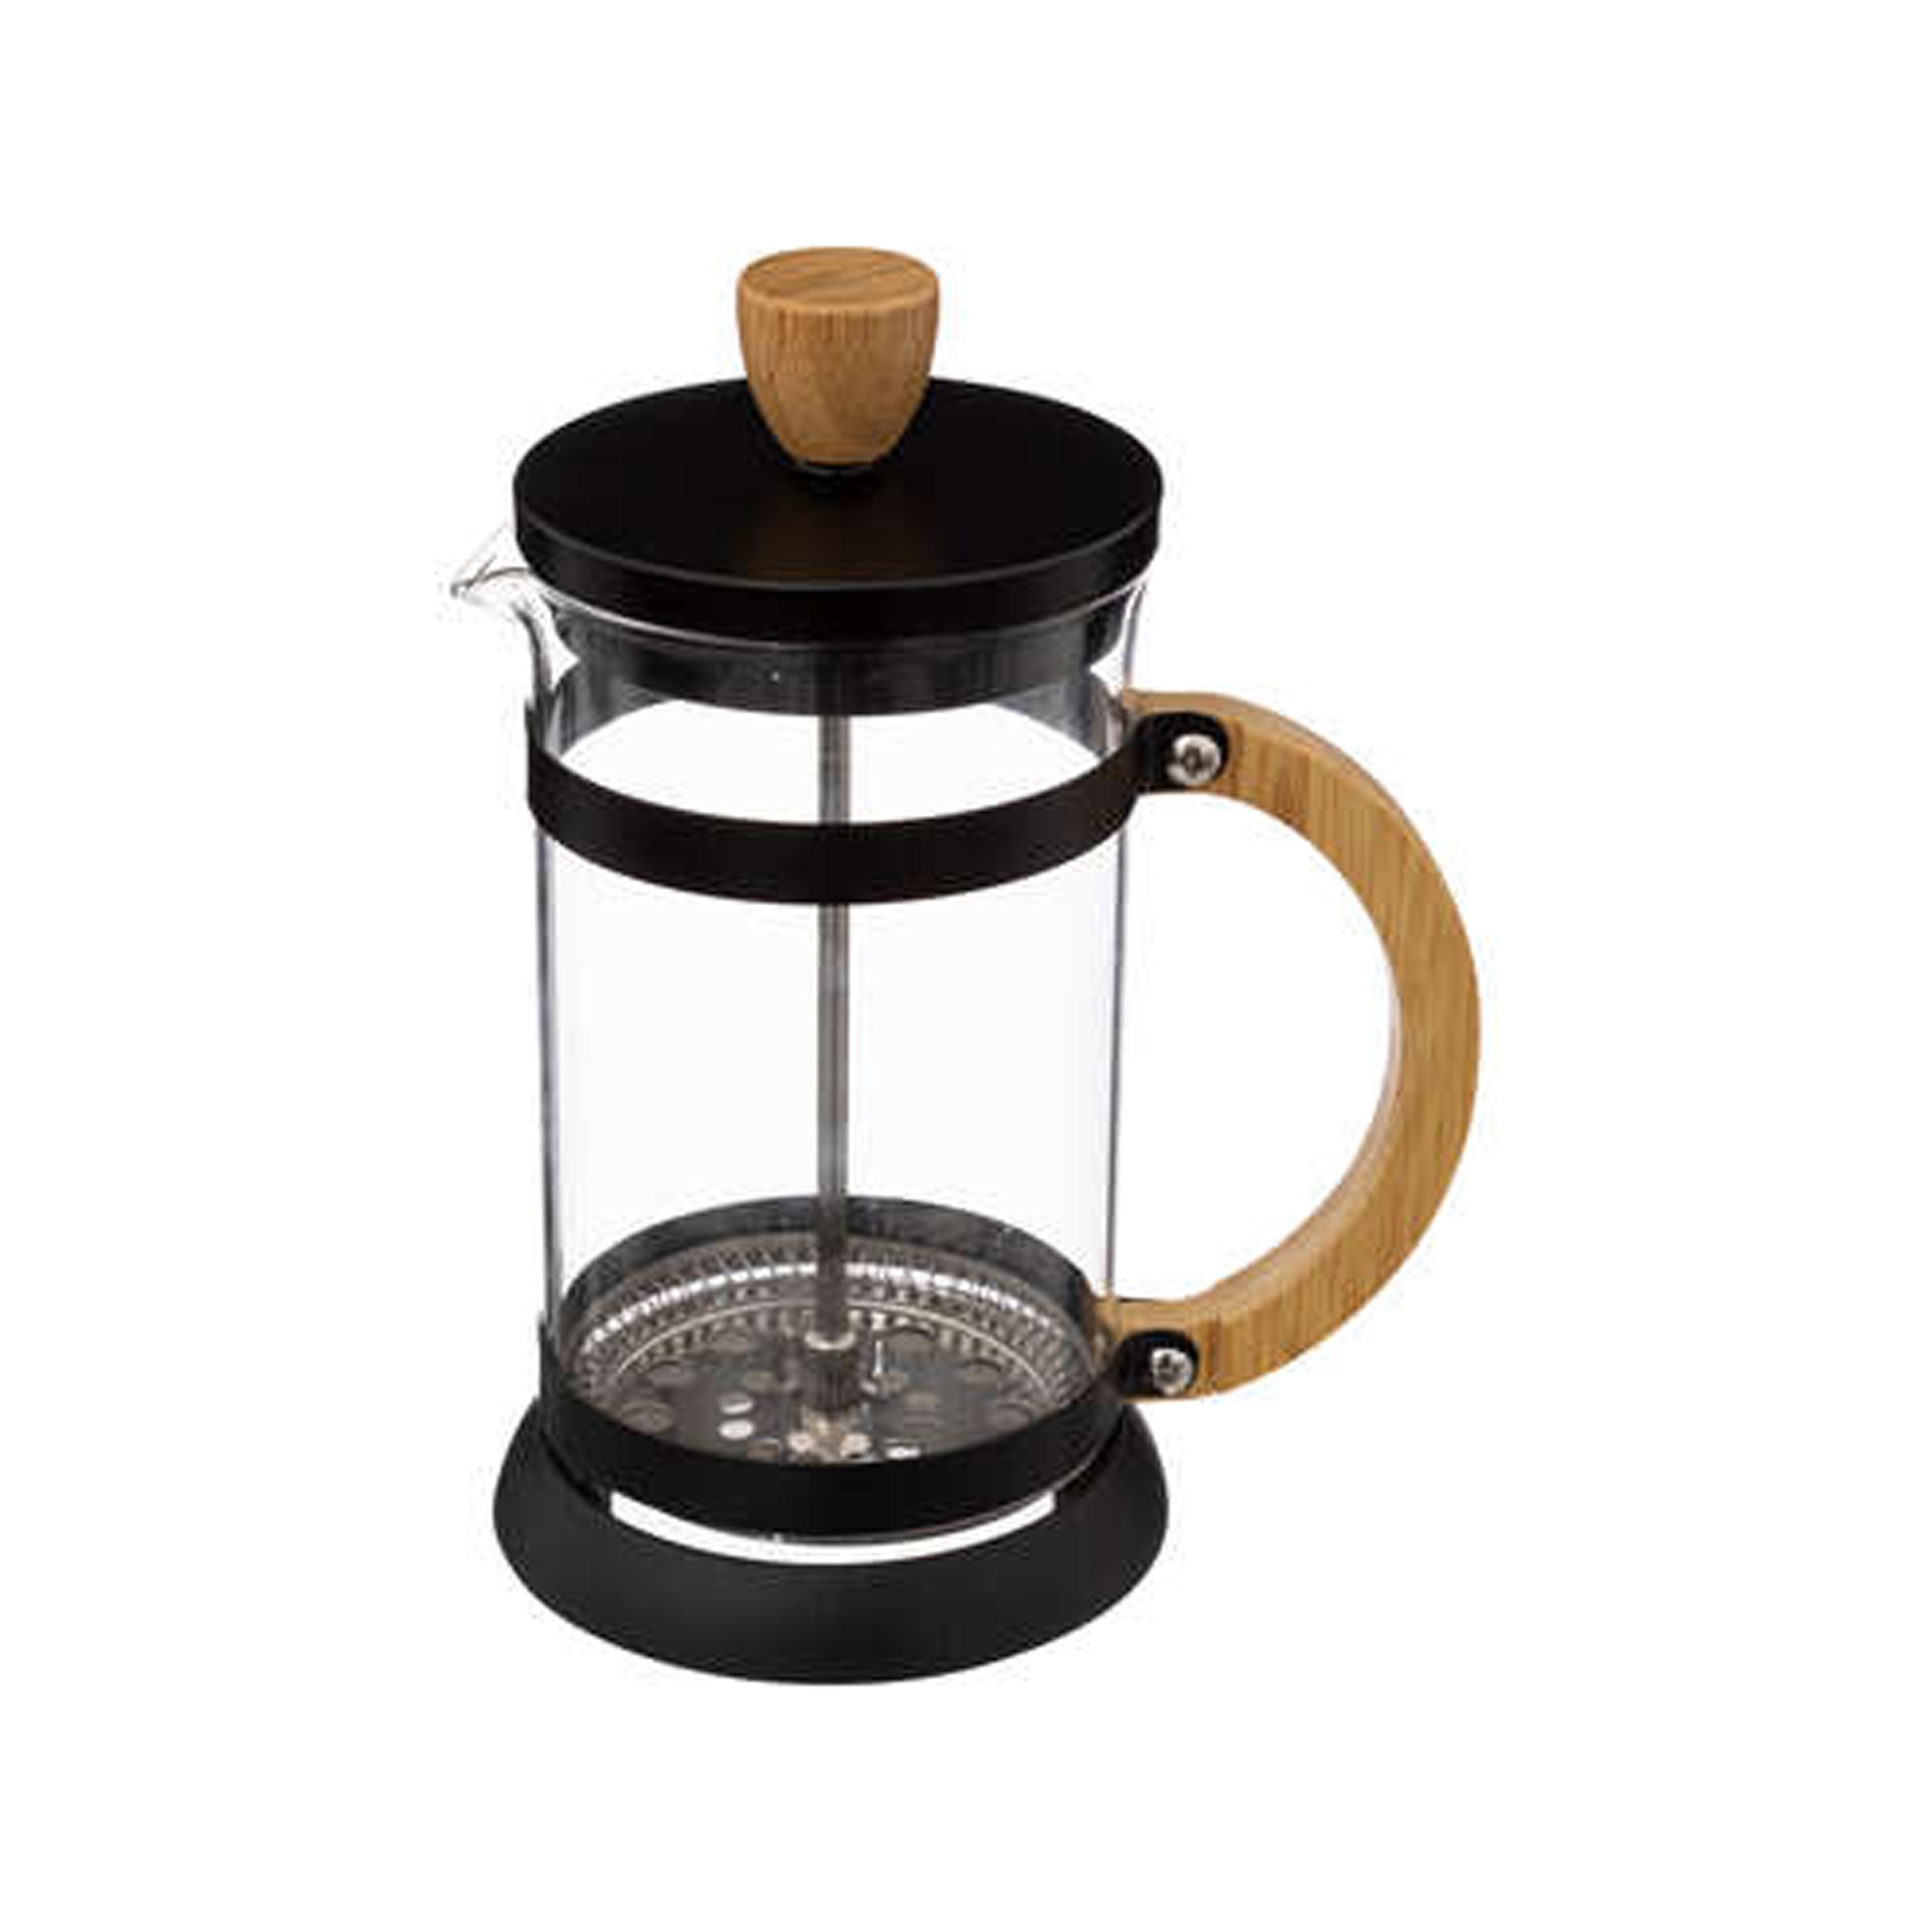 Cafetiere French Press koffiezetter koffiemaker pers 600 ml glas-rvs-bamboe